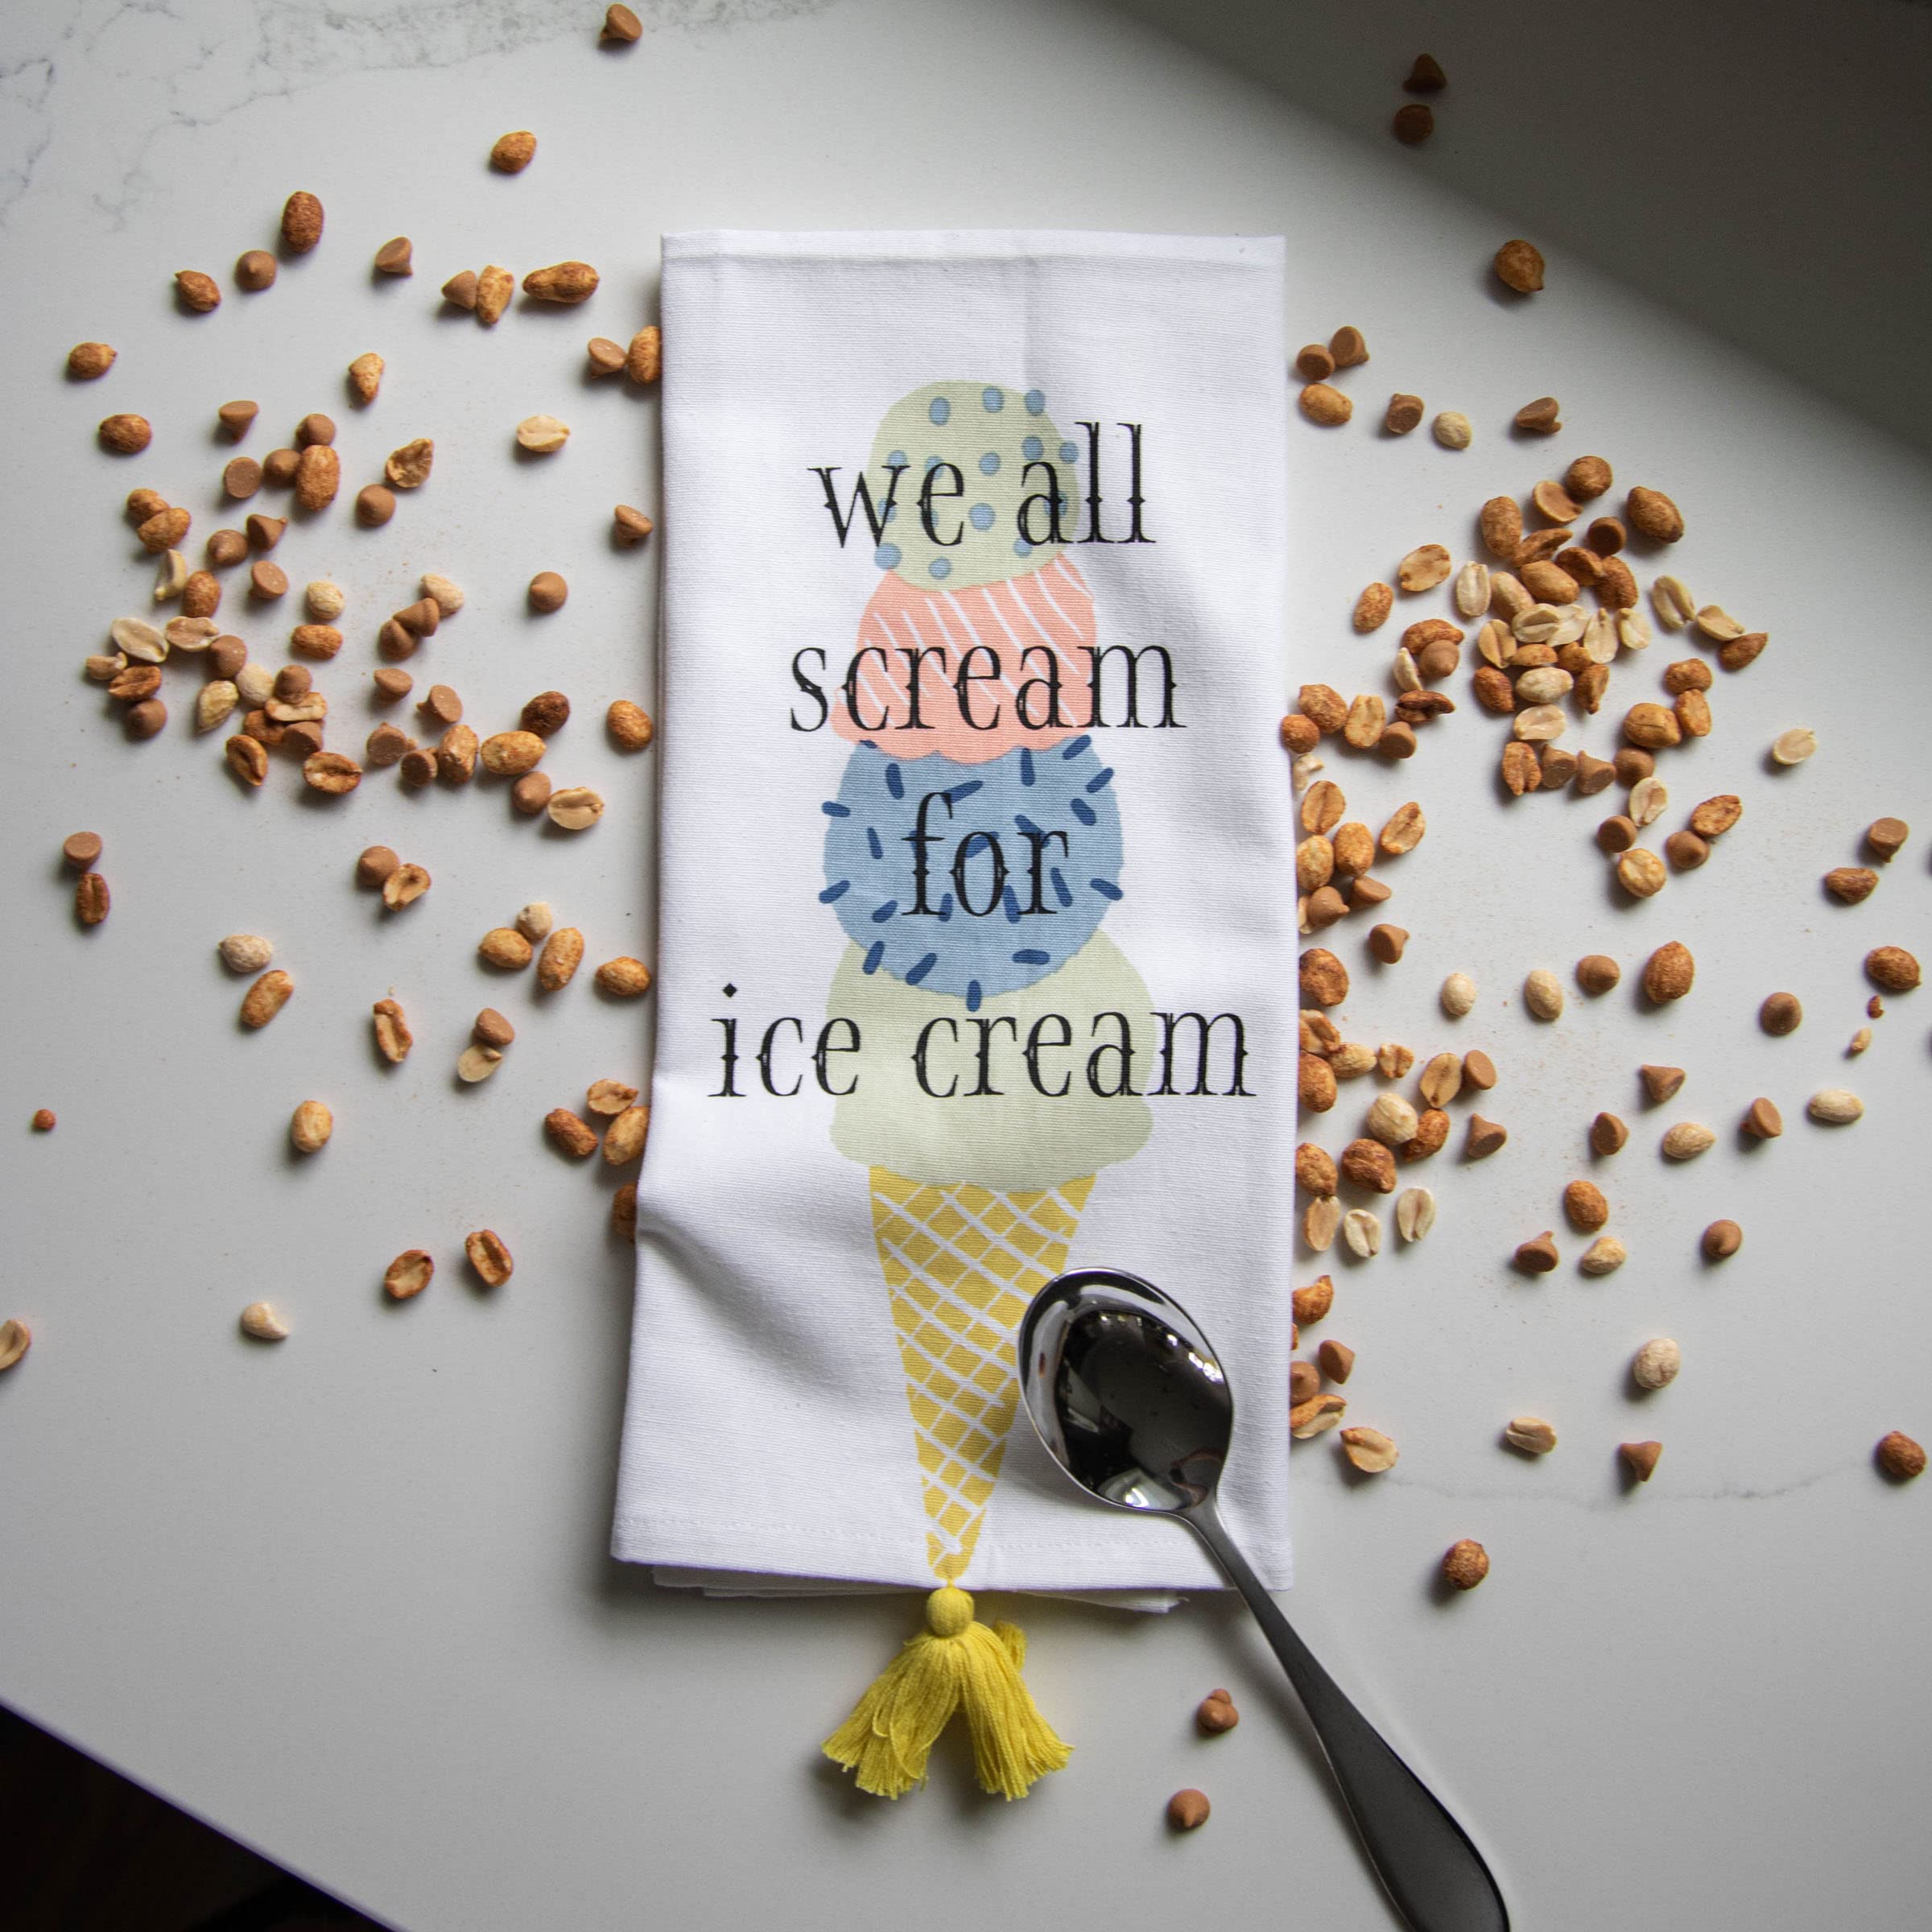 Foreside Home and Garden We All Scream for Ice Cream Multi Cotton Tea Towel